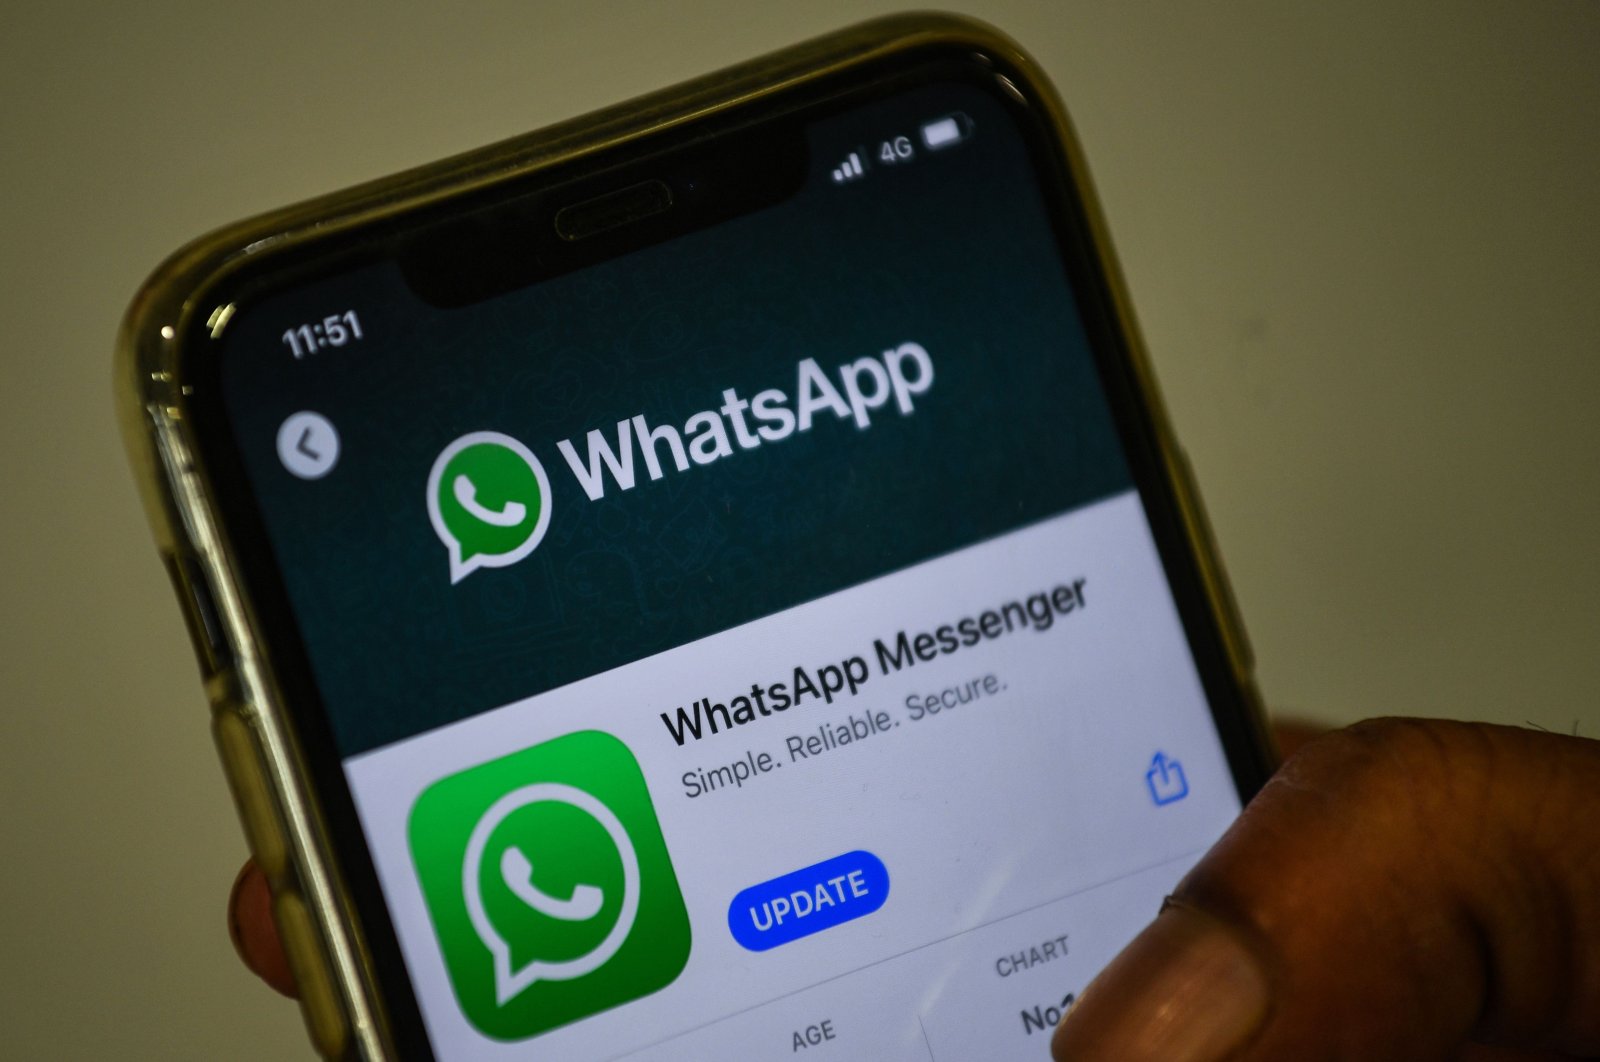 A user updates the WhatsApp application on his mobile phone in Mumbai, India, Nov. 6, 2020. (AFP Photo)